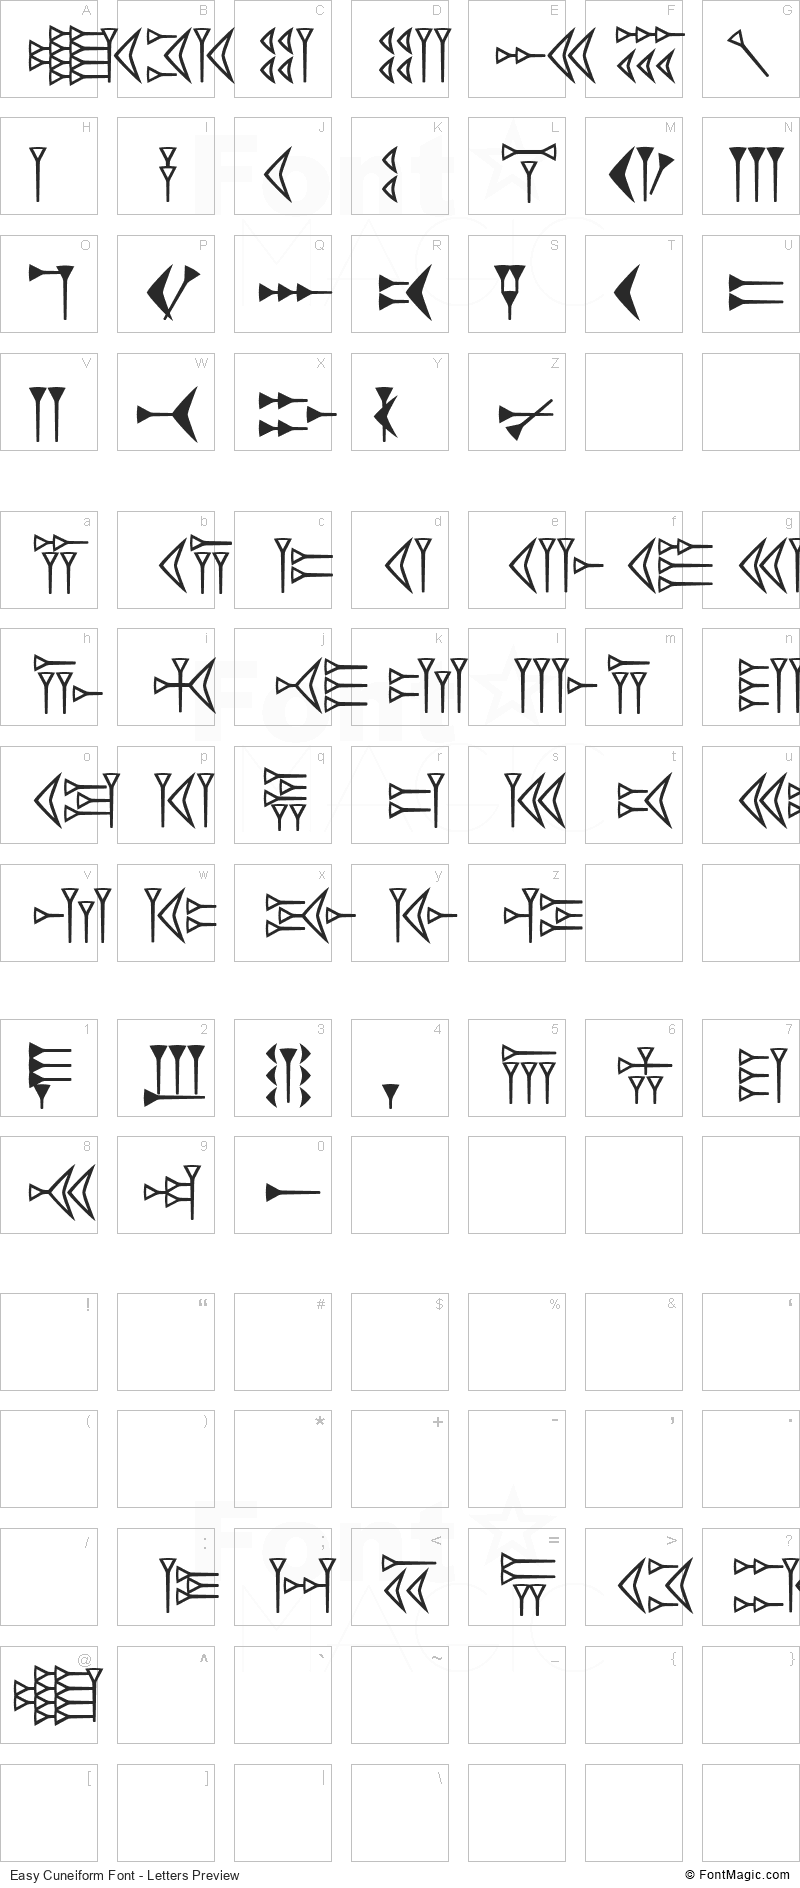 Easy Cuneiform Font - All Latters Preview Chart